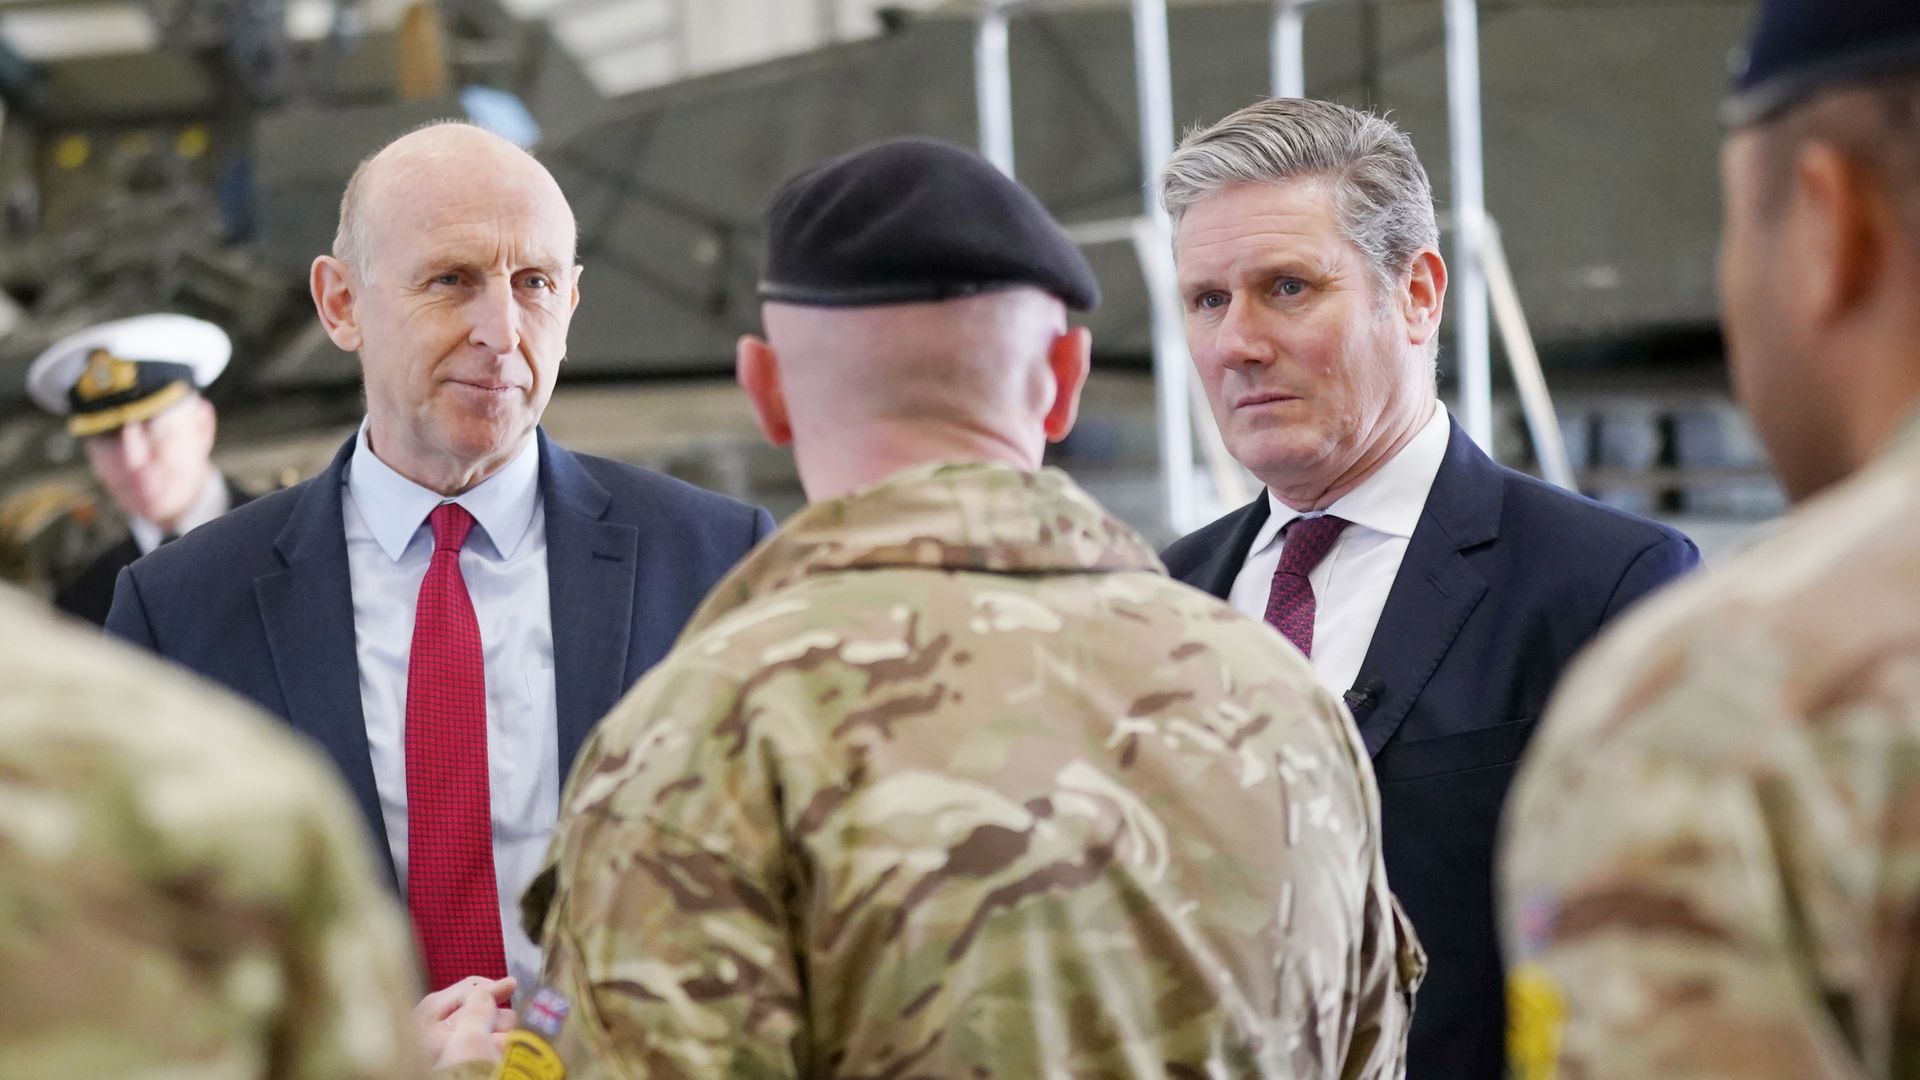 Starmer says national security 'comes first' as he makes pitch to Tory voters